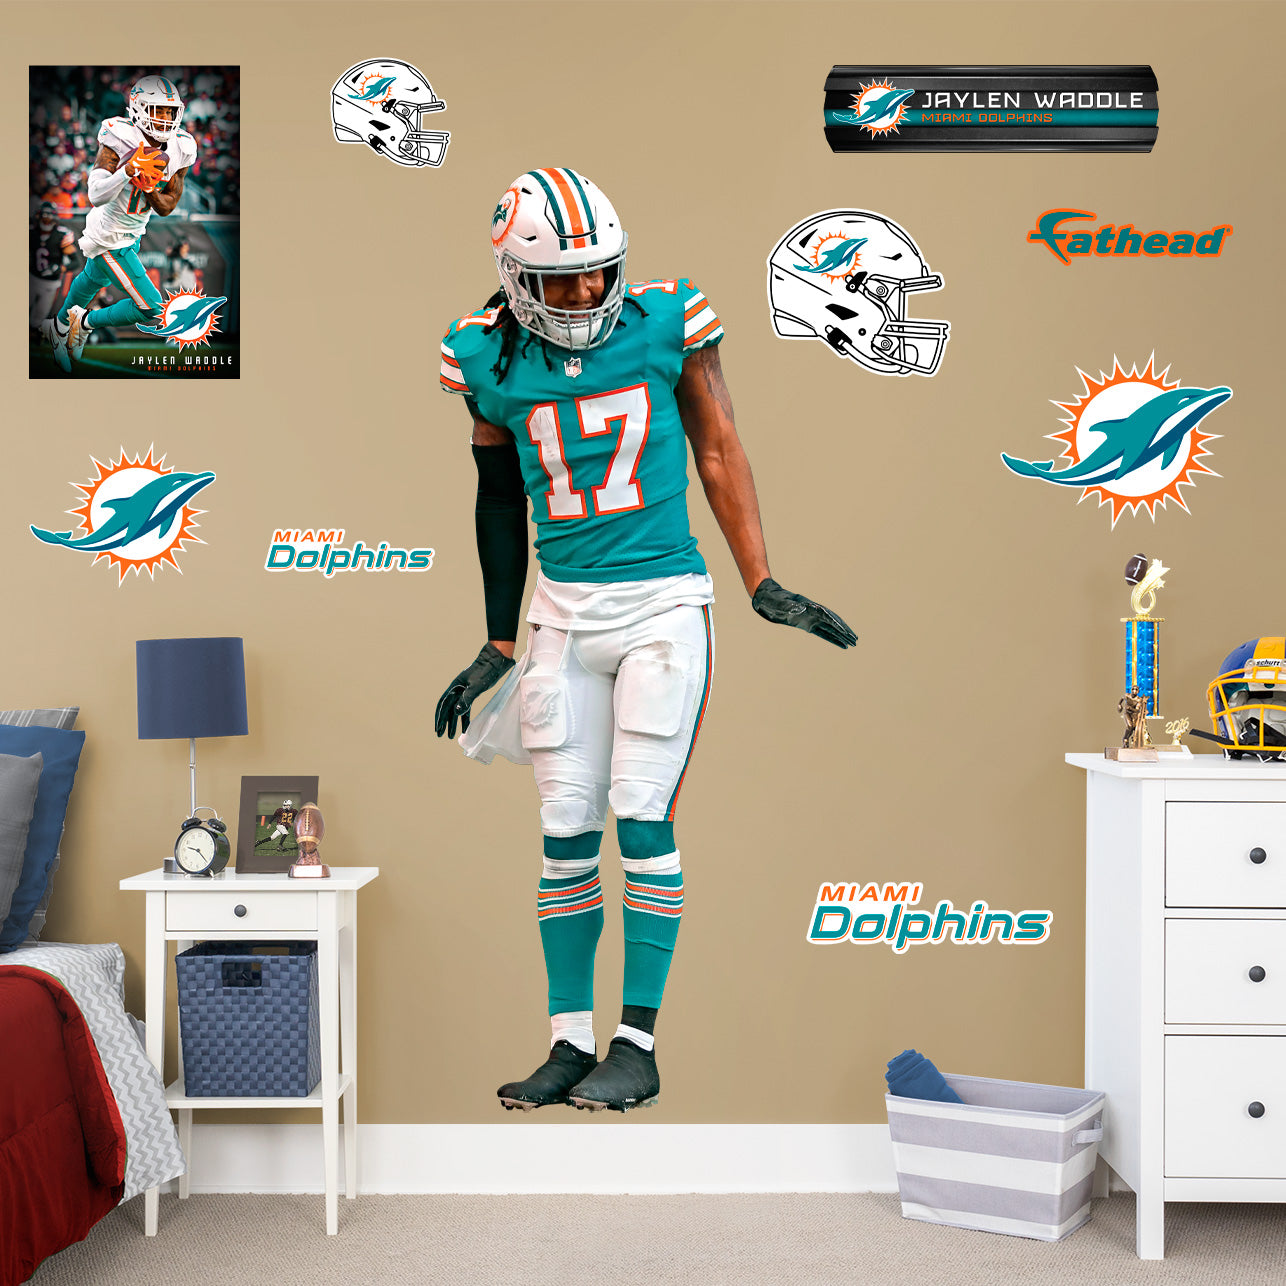 Miami Dolphins: Jaylen Waddle  "Waddle Waddle"        - Officially Licensed NFL Removable     Adhesive Decal